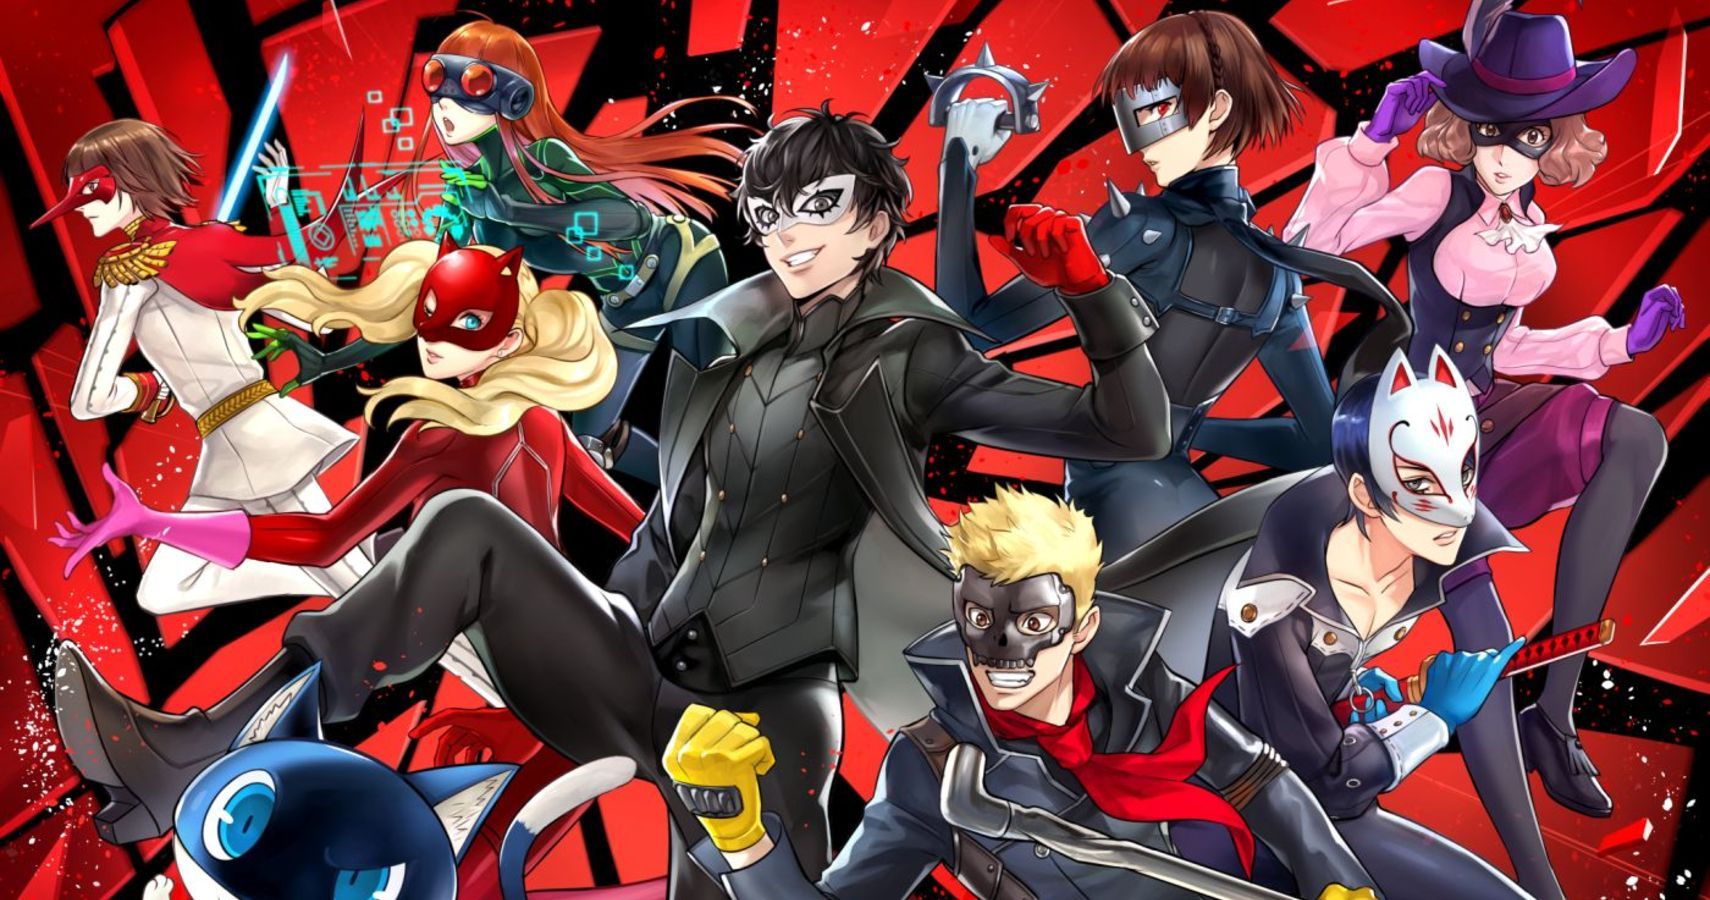 The Phantom Thieves From Persona 5 Should Appear In Tokyo Mirage Sessions #FE Encore